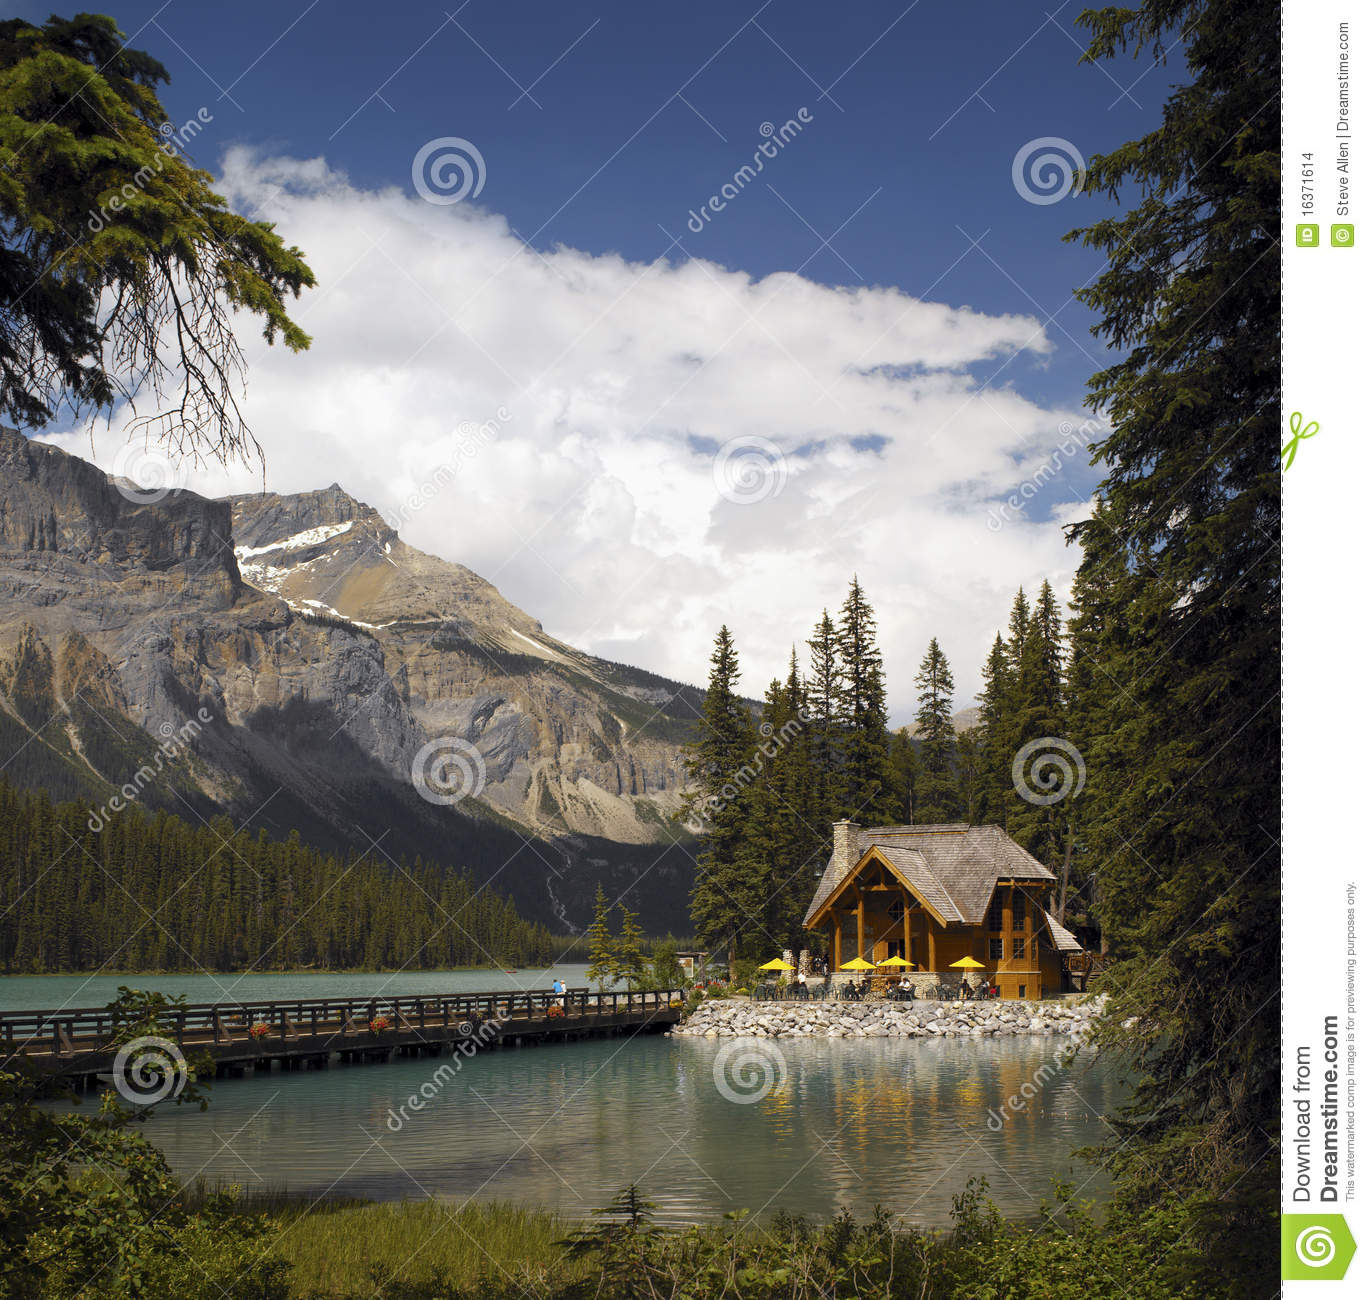 Yoho National Park clipart #6, Download drawings